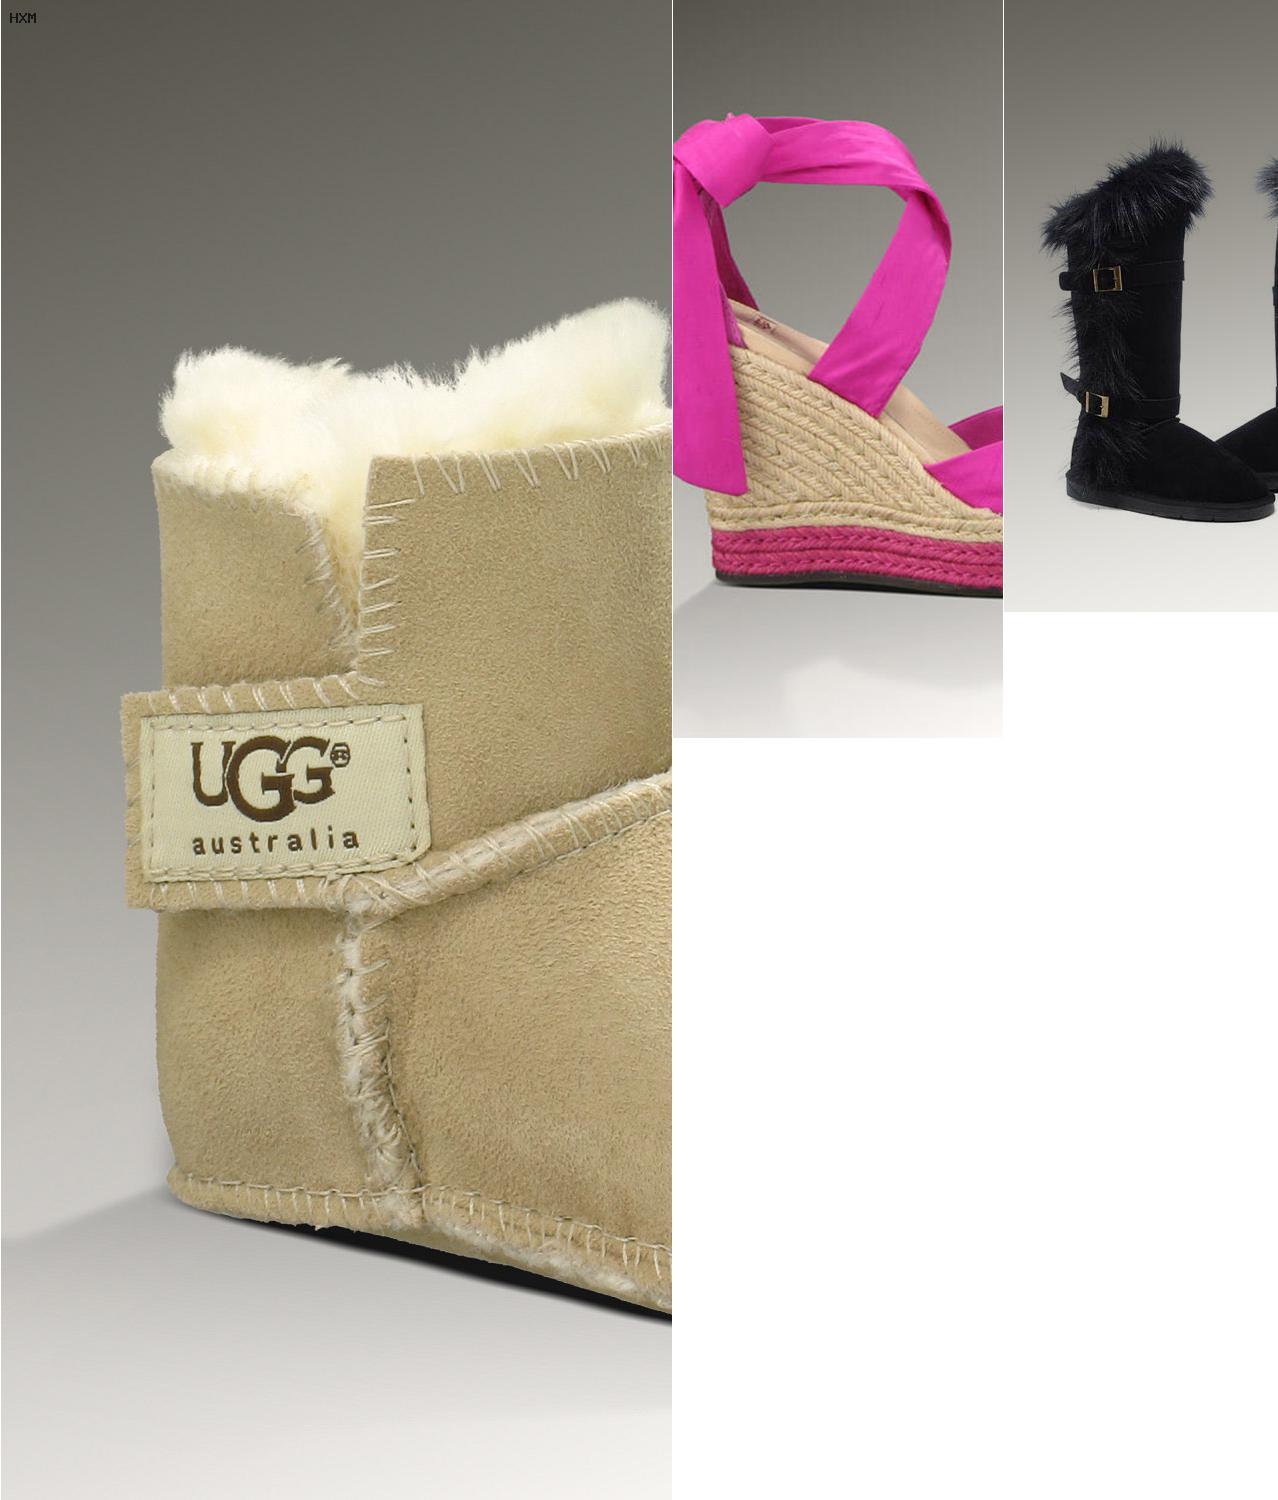 ugg boots at a discount